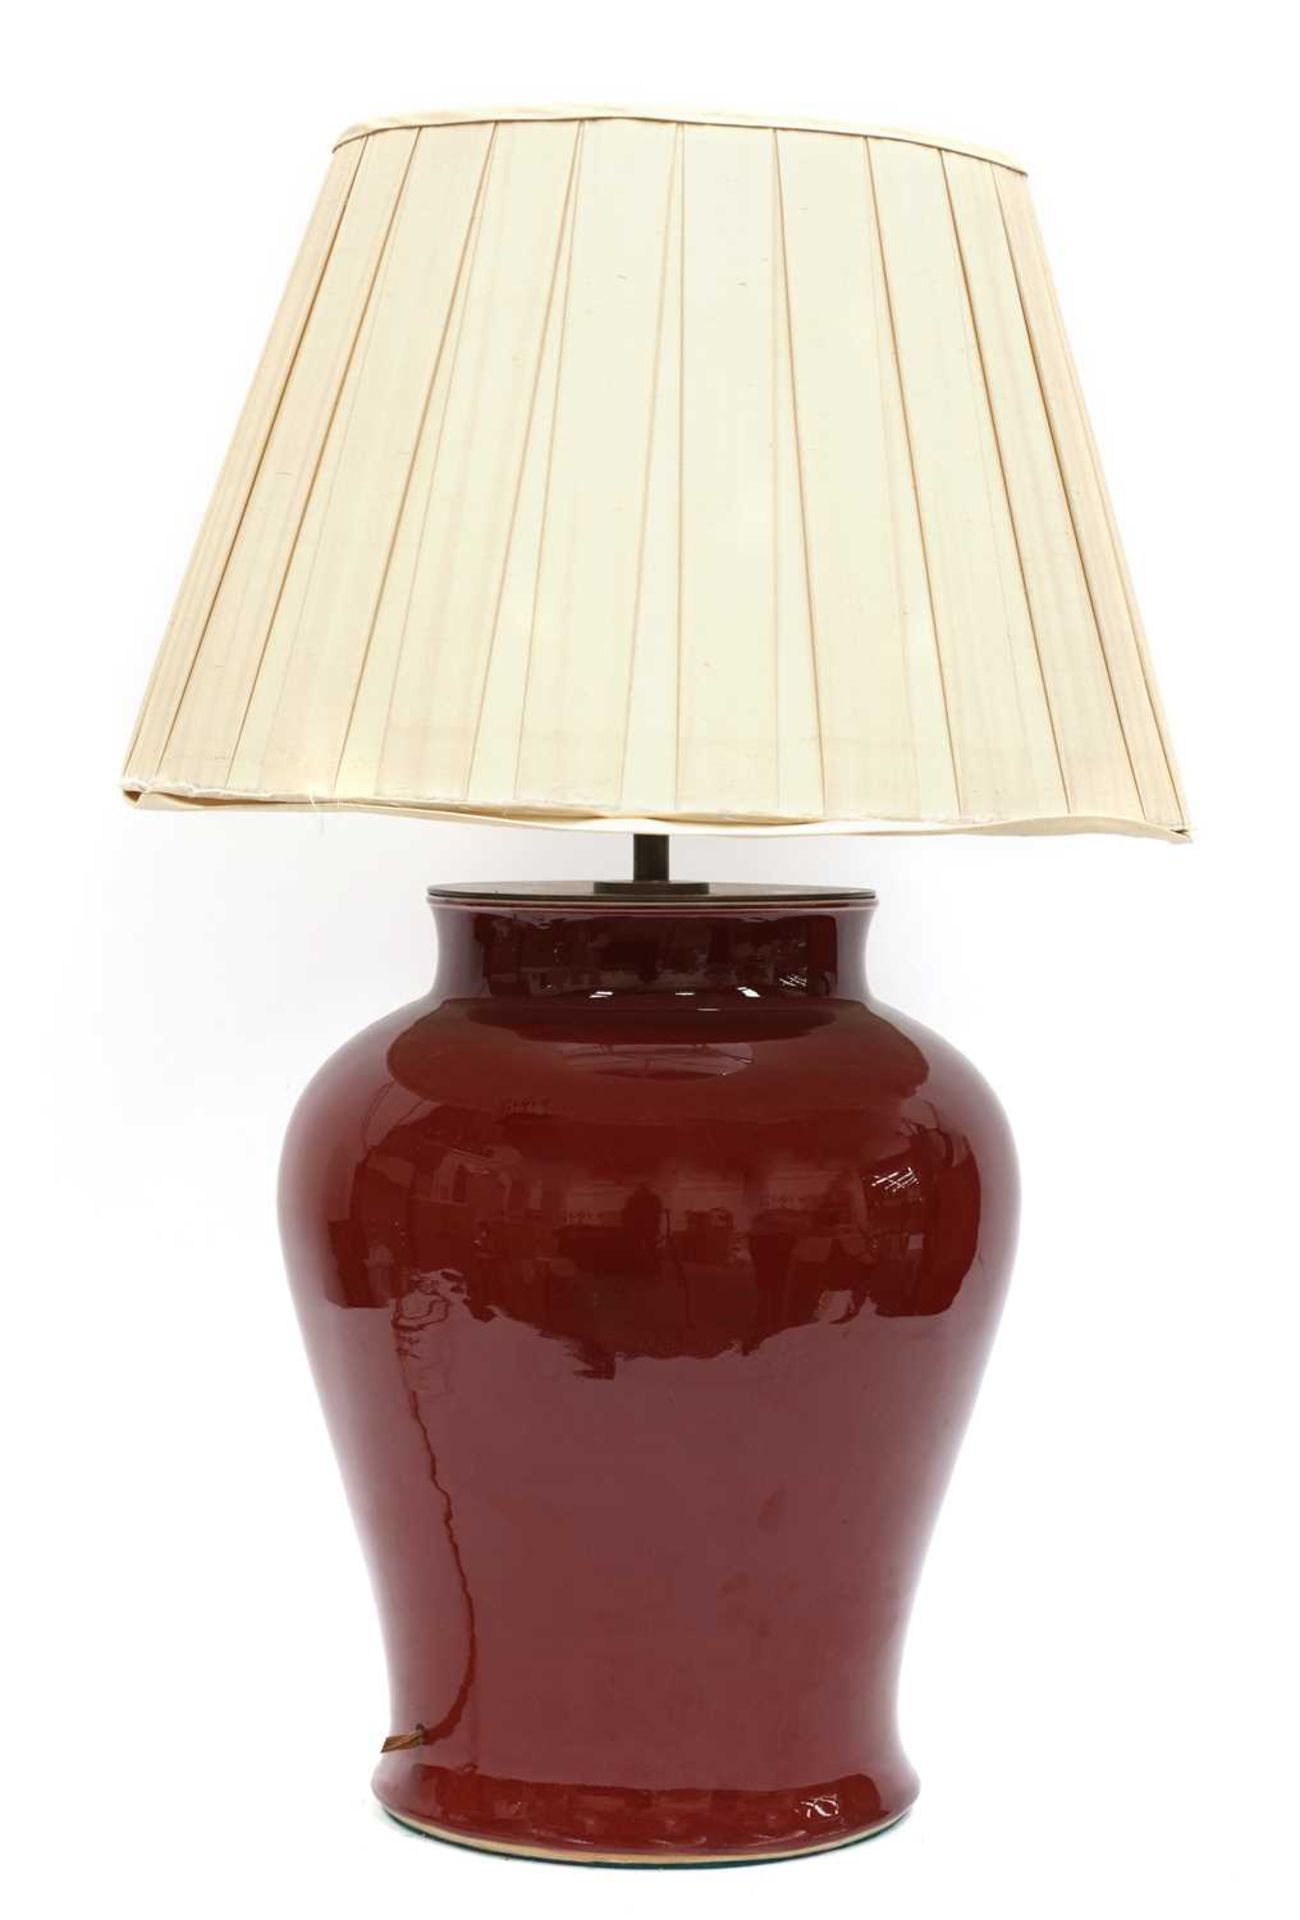 A large Chinese-style red-glazed porcelain table lamp,